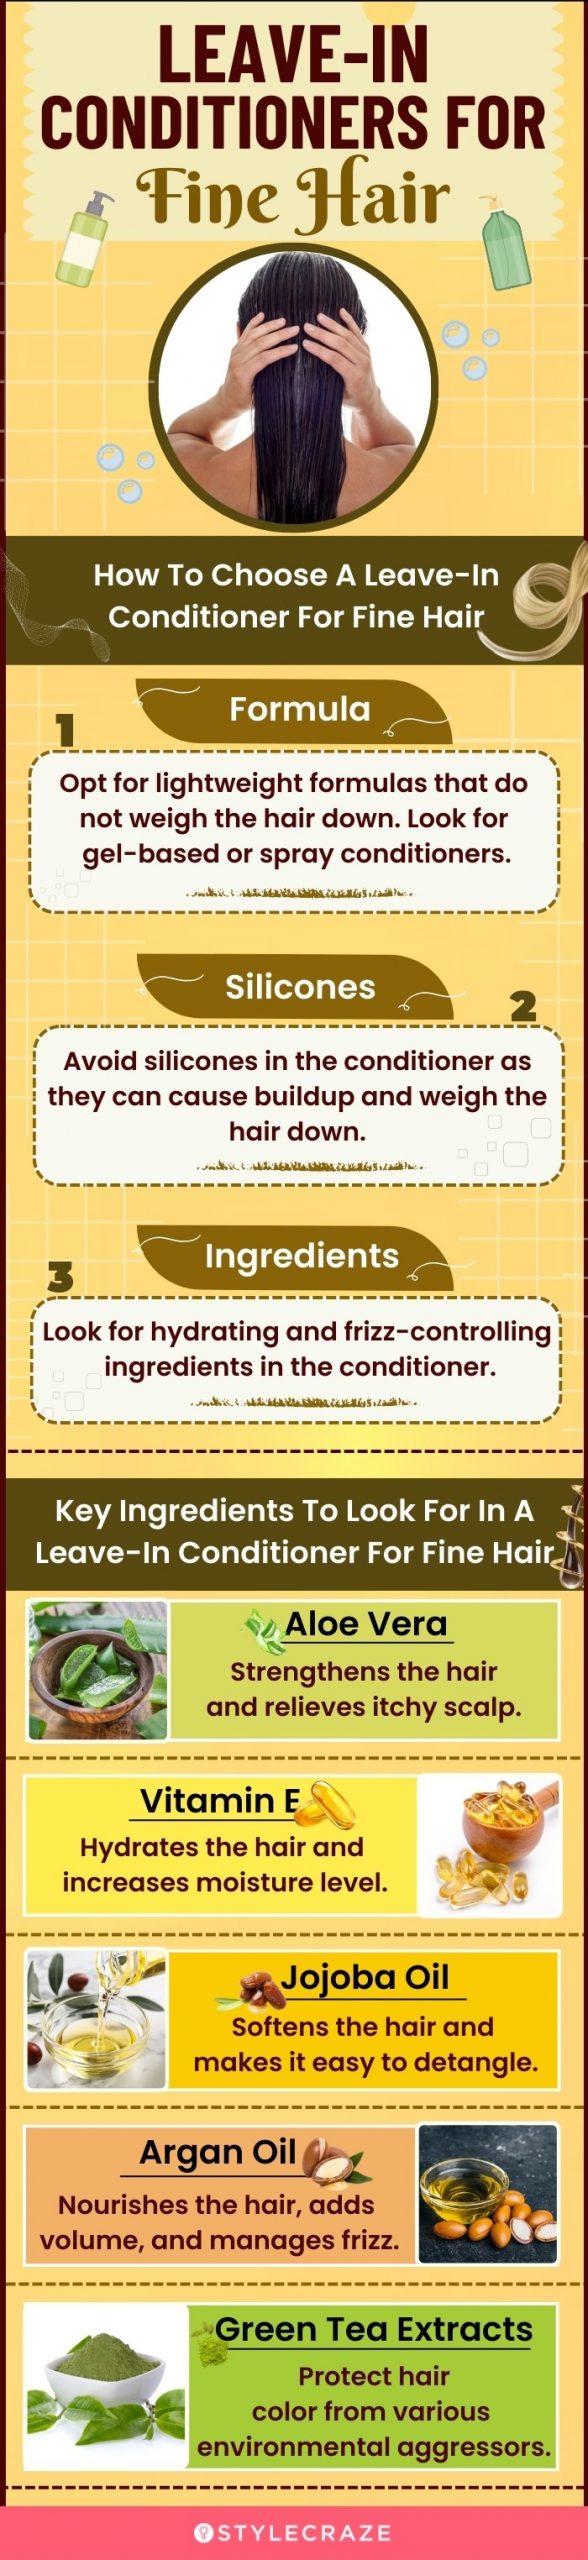 Leave-In Conditioners For Fine Hair [infographic]